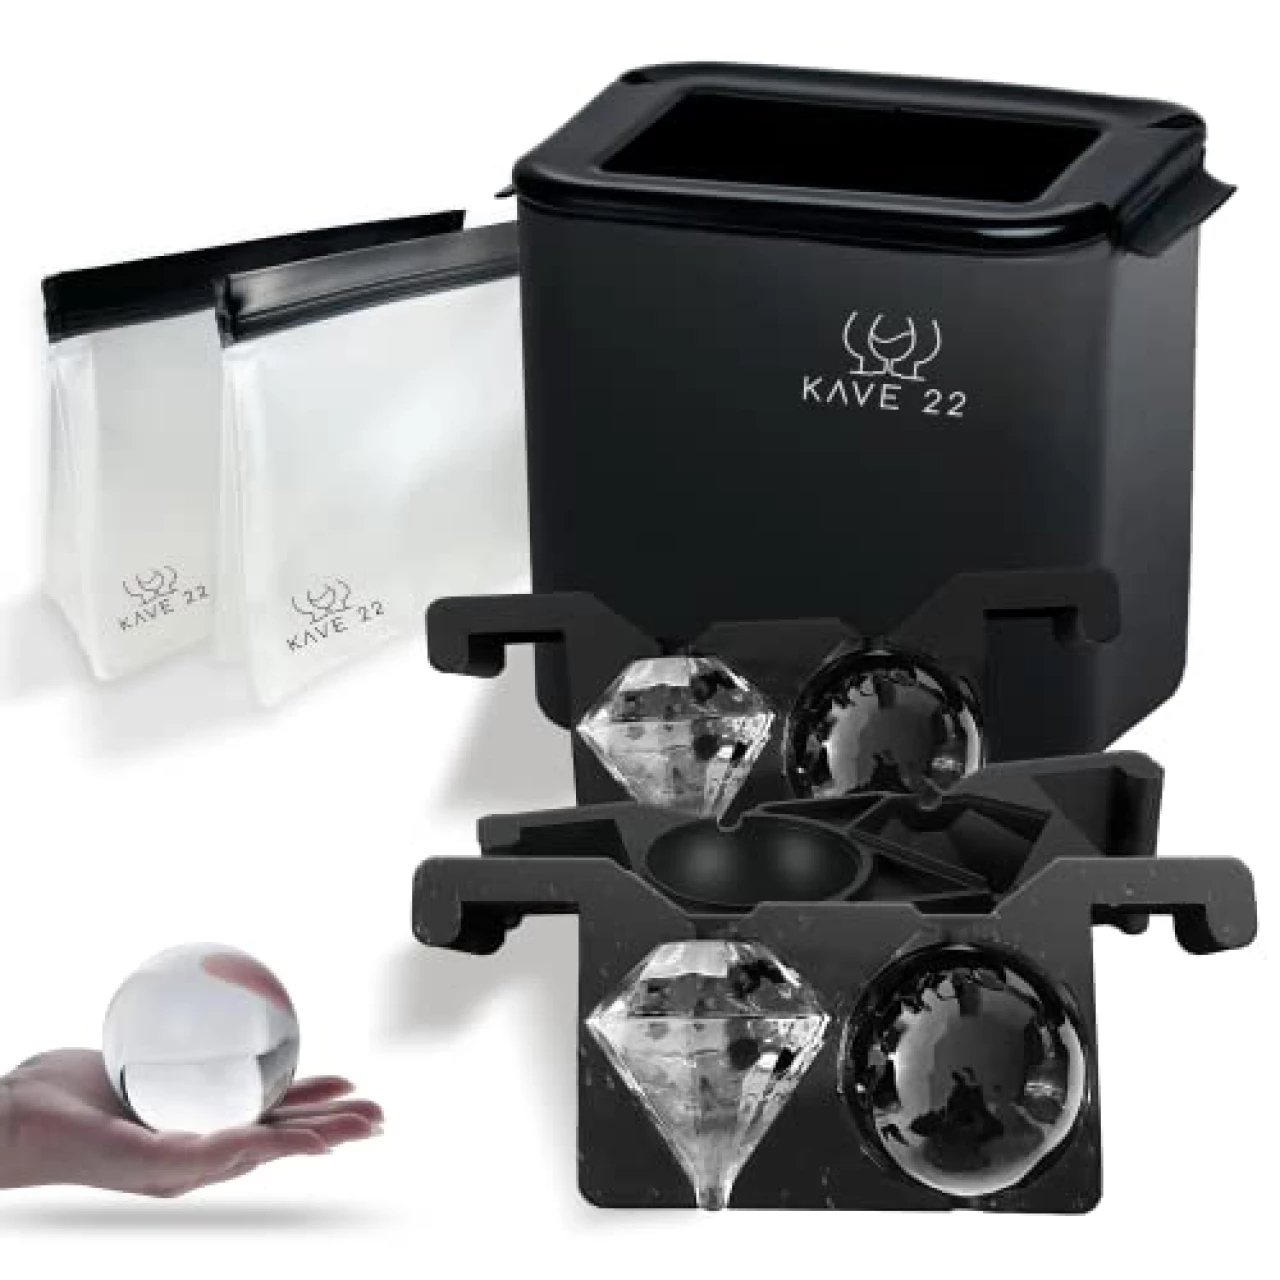 KAVE 22 Clear Ice Ball and Diamond Mold, Prepare 4 Clear Ice at Once, With 2 Storage Bags – Elegant and Refined Ice Ball Molds for Whiskey, Bourbon, Vodka – Sphere and Diamond Shaped Ice Cube Trays